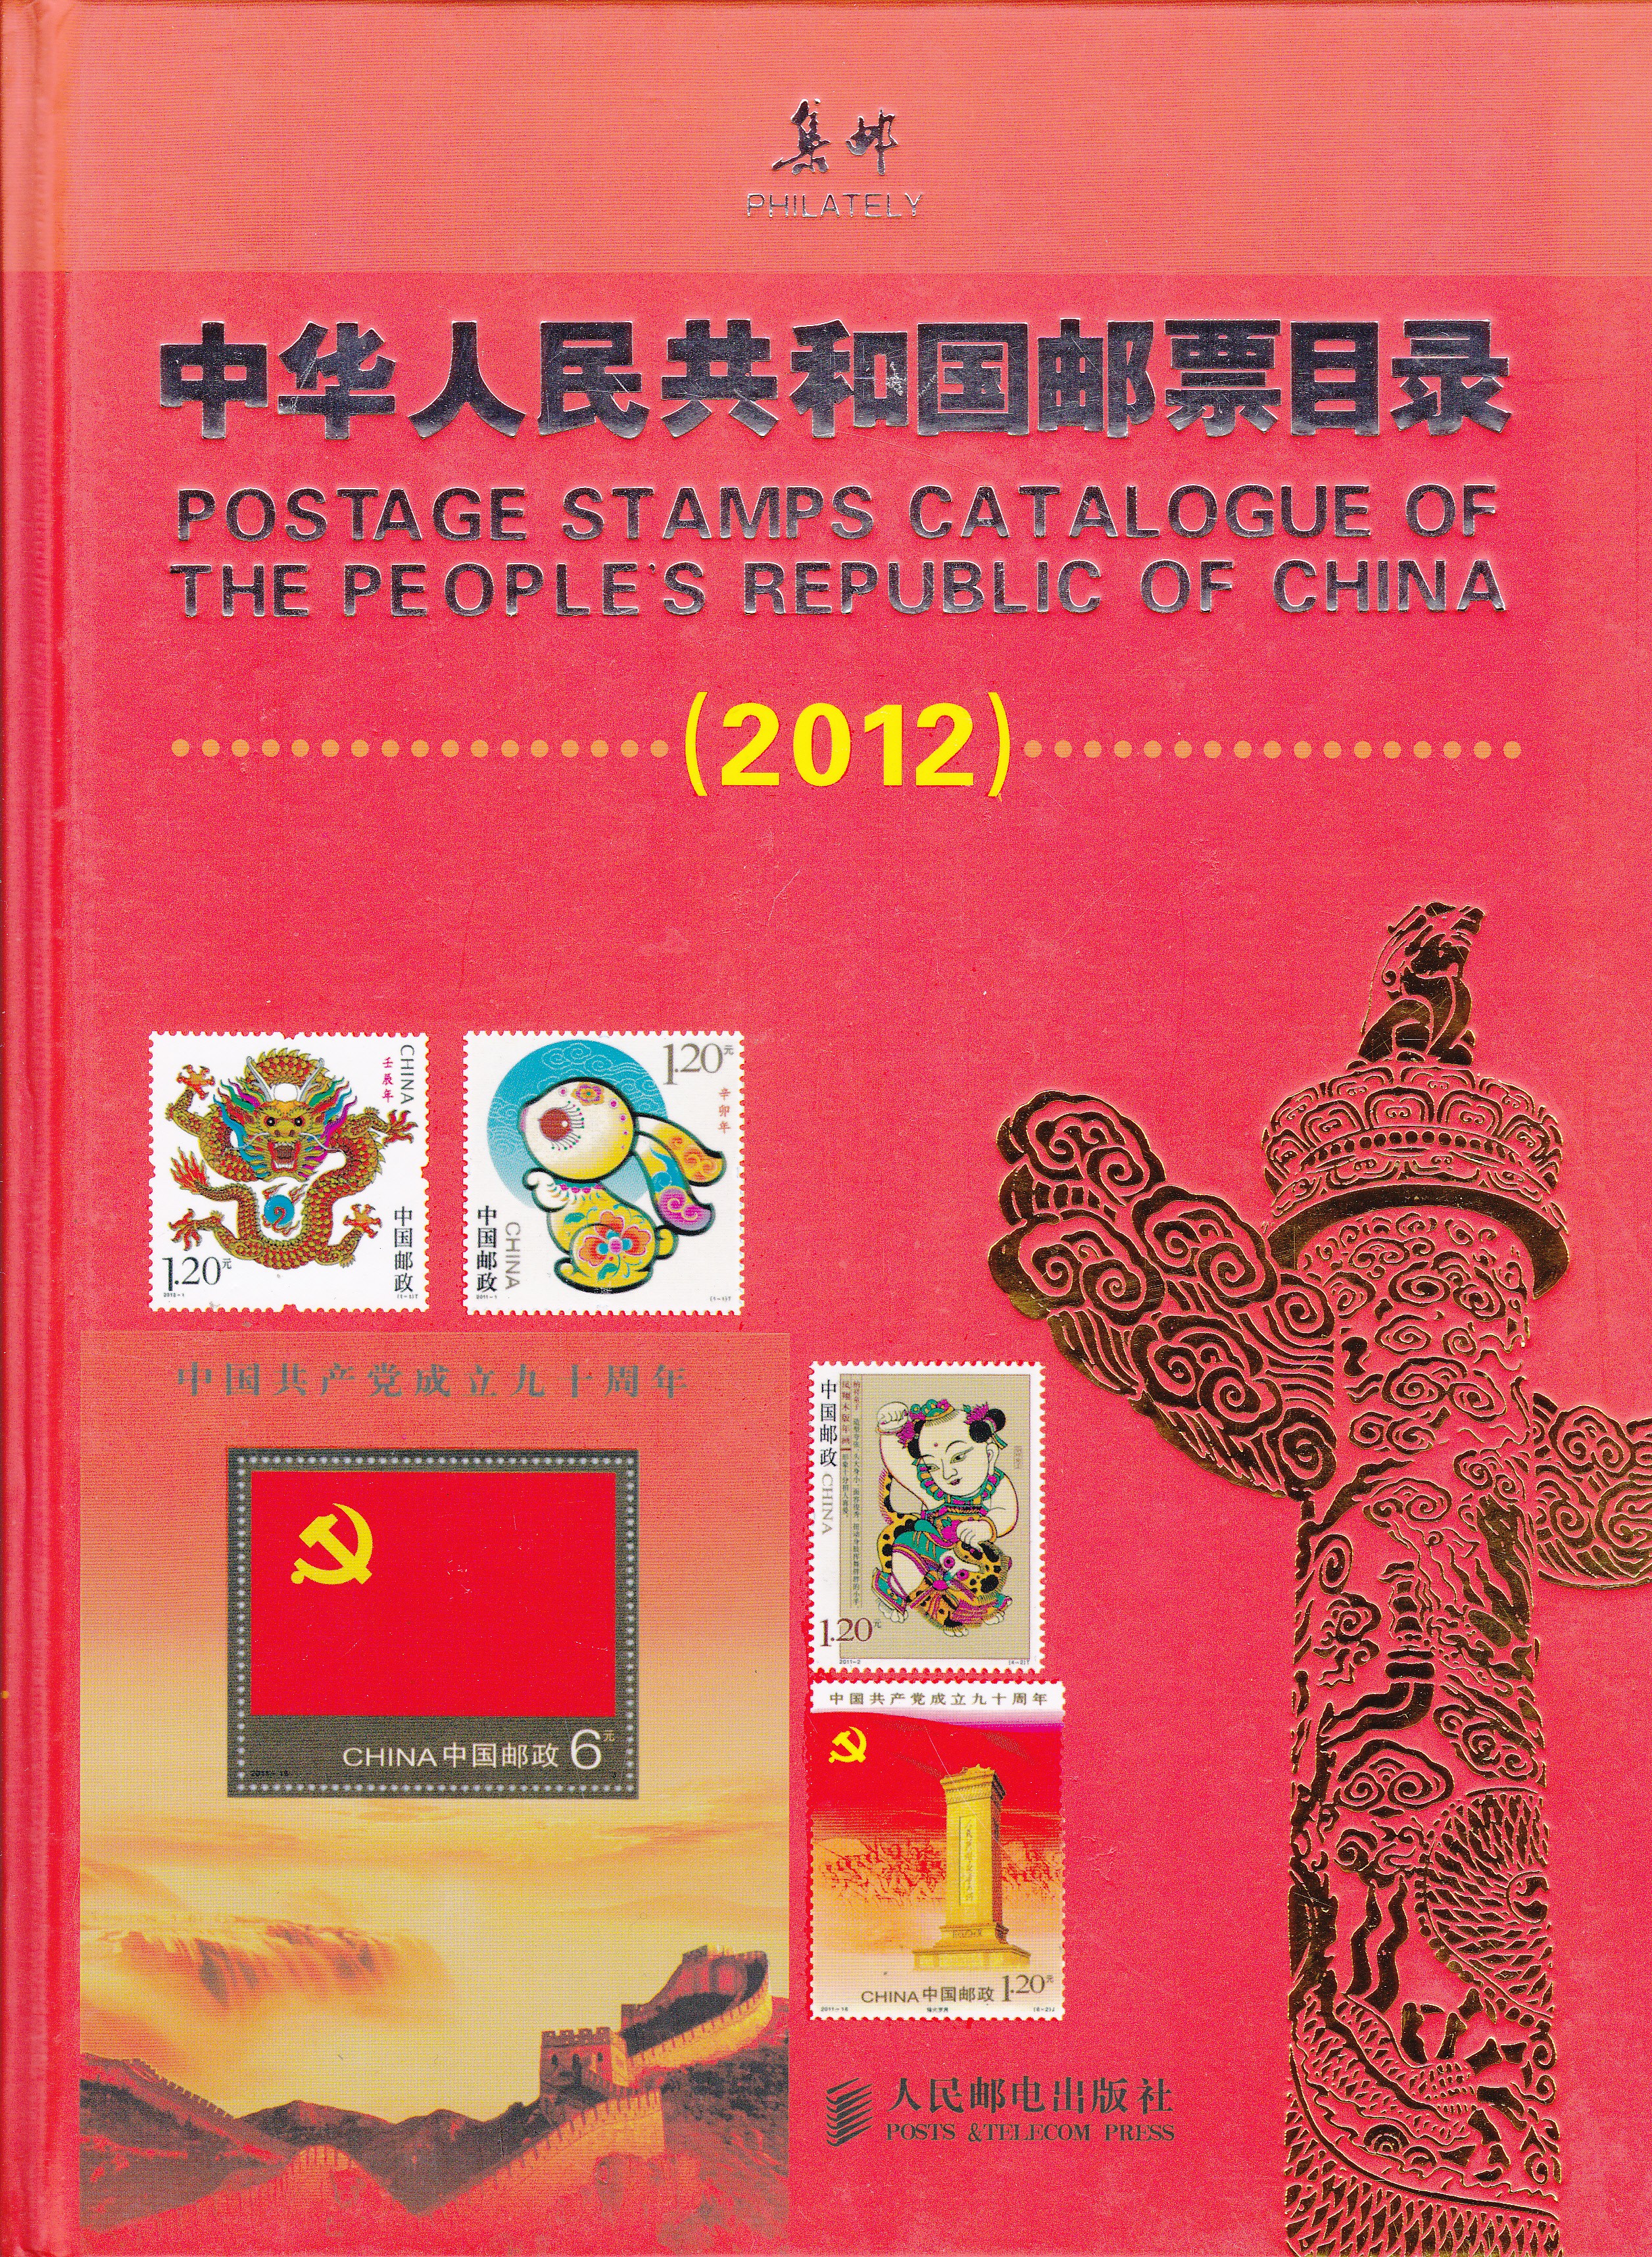 F2211 Post Stamps Catalogue of P.R.China (2012 Large Editon)